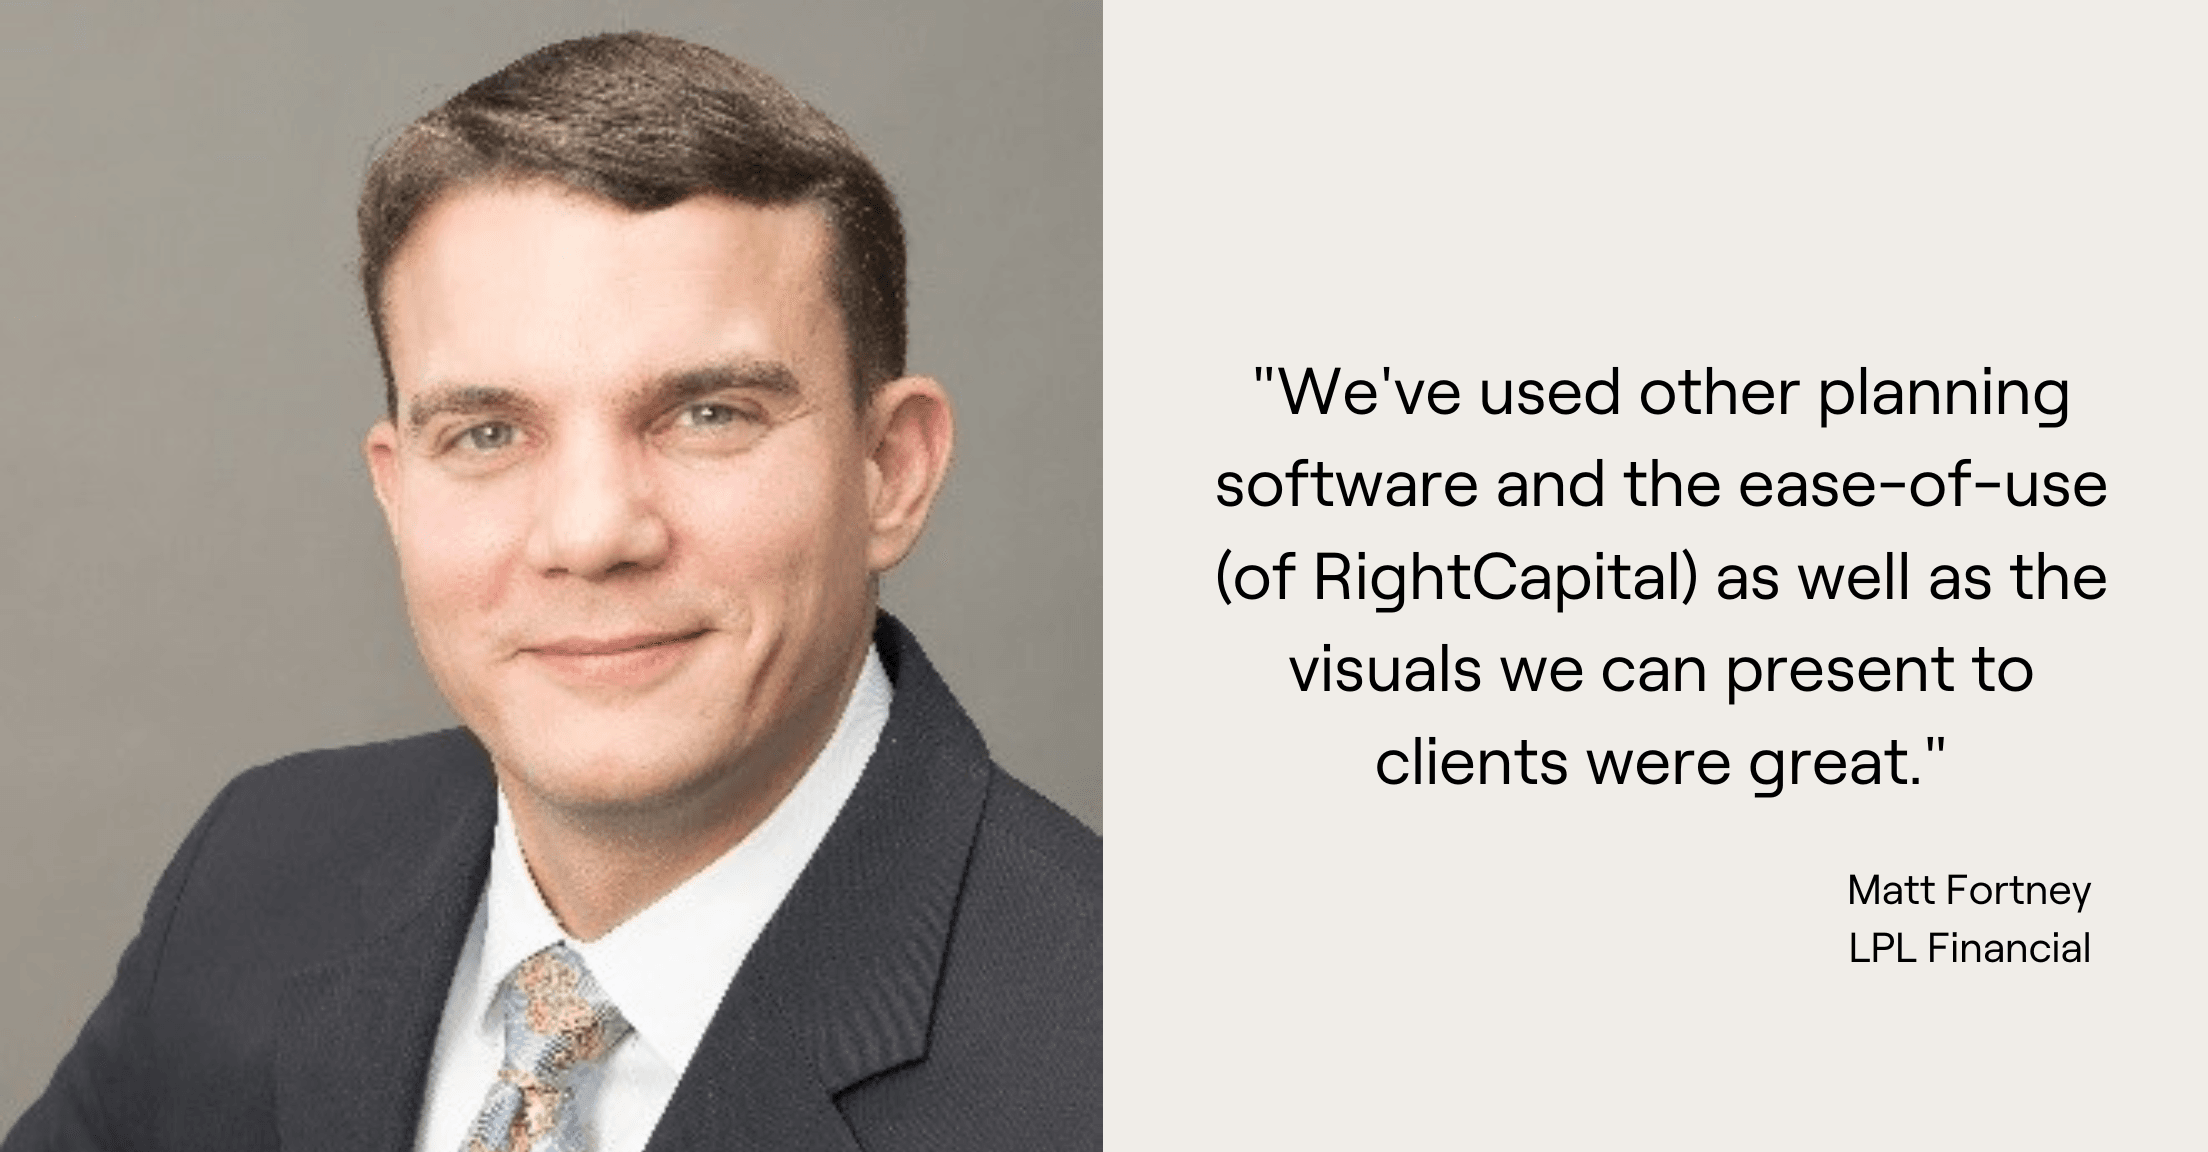 Headshot and quote from Matt Fortney, "We've used other planning software and the ease-of-use (of RightCapital) as well as the visuals we can present to clients were great."